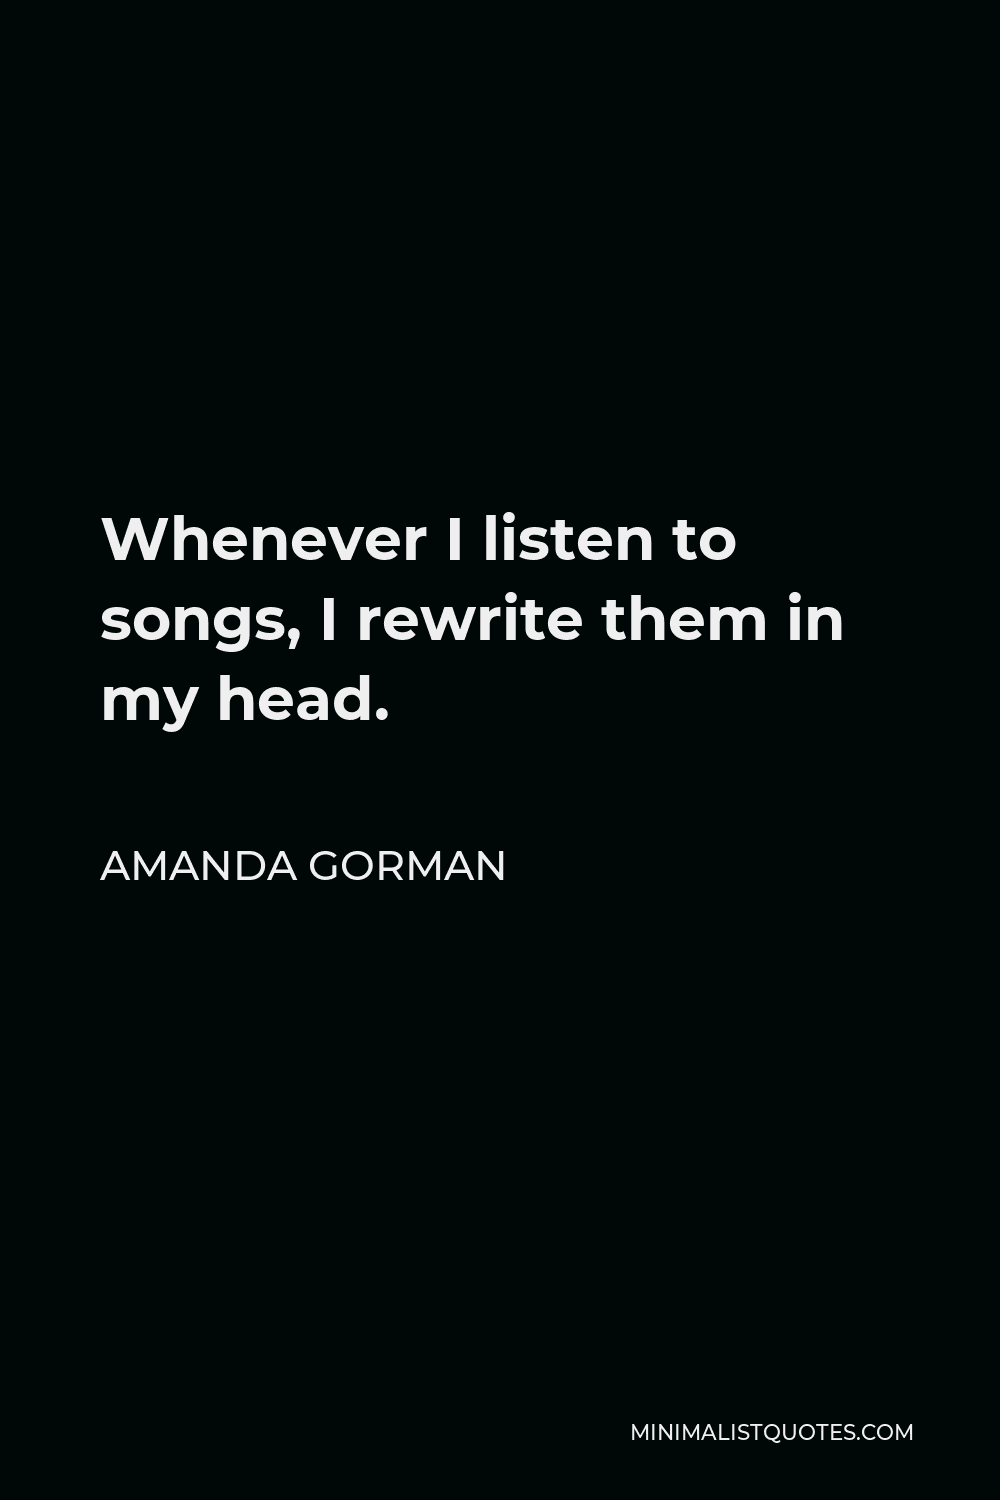 Amanda Gorman Quote - Whenever I listen to songs, I rewrite them in my head.